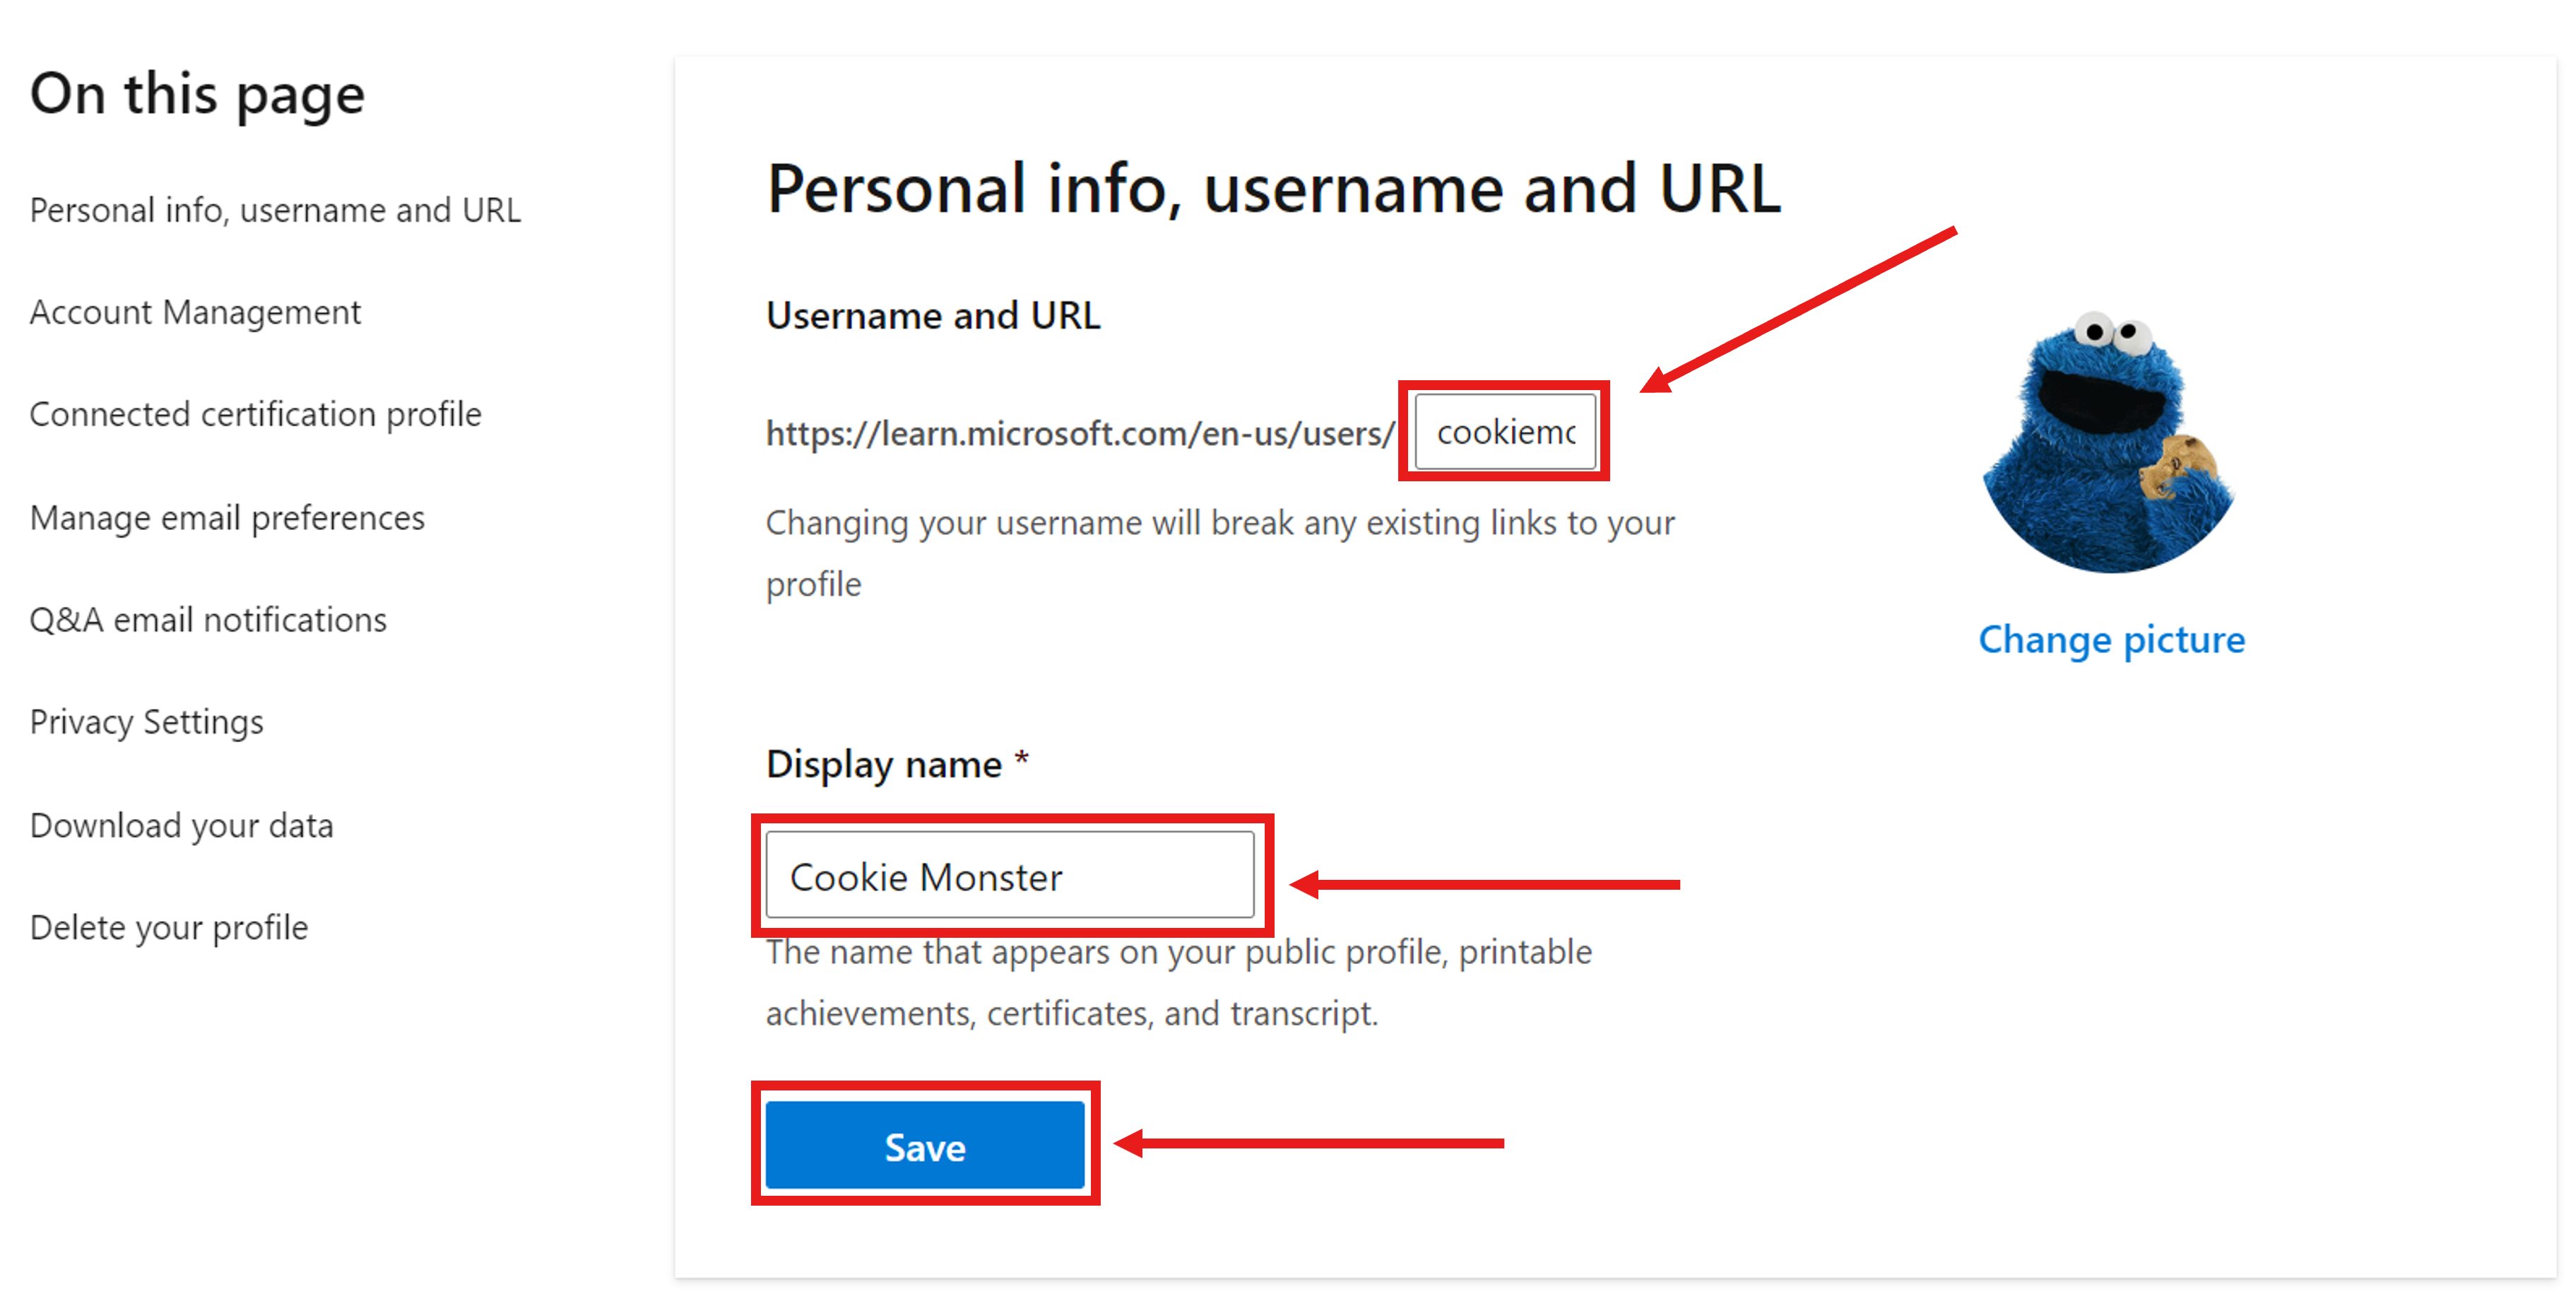 Screenshot of the Personal info, username, and URL section in the Microsoft Learn profile settings.